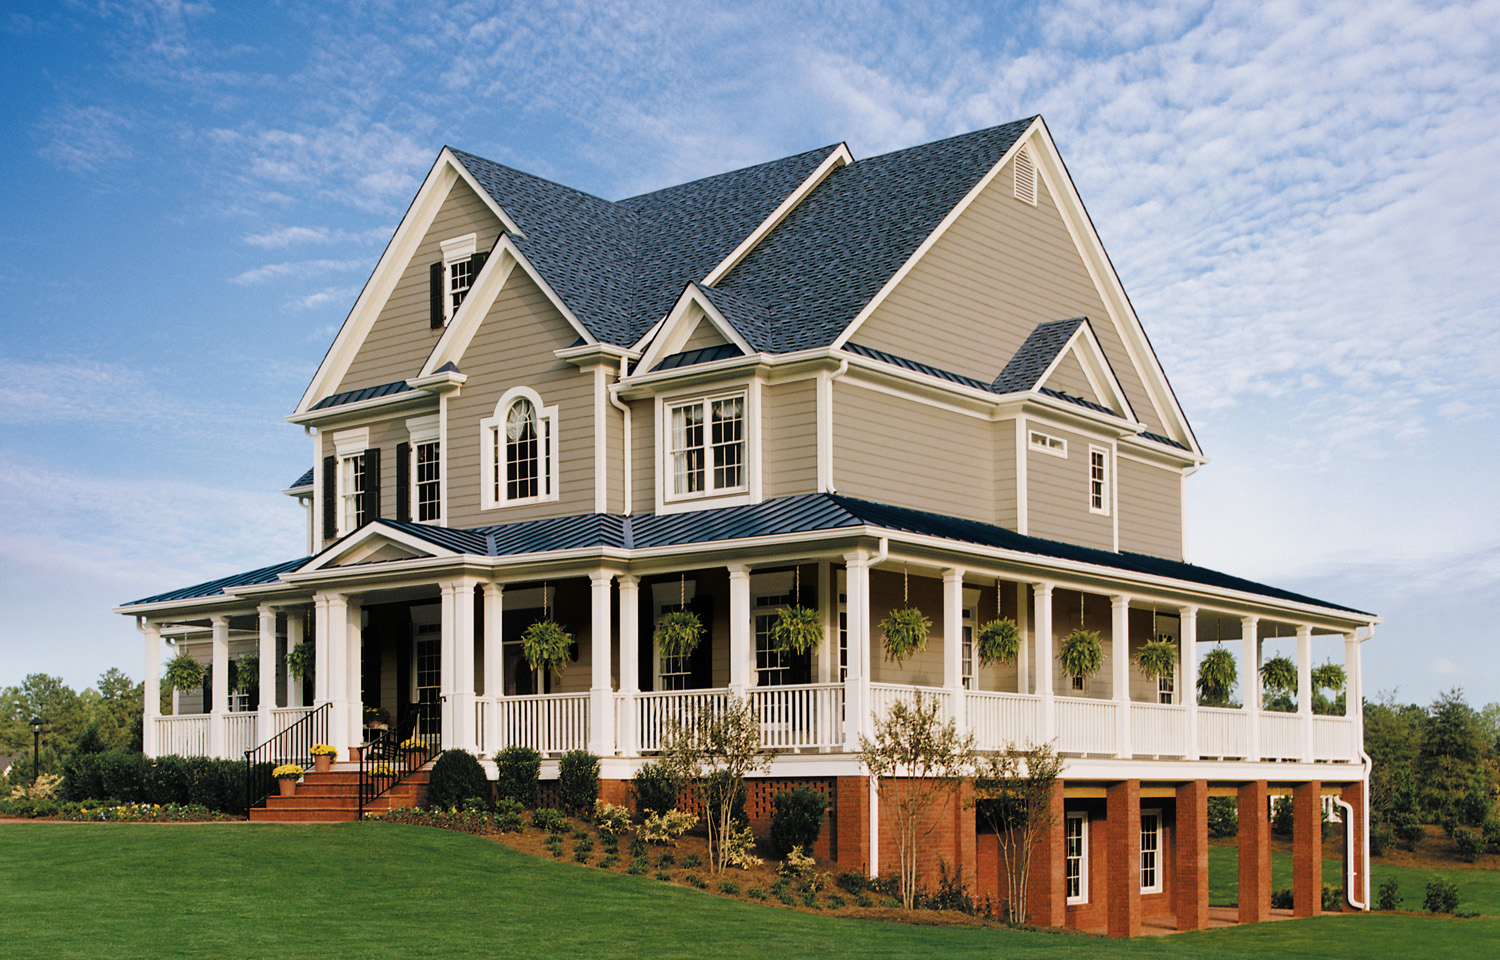 Simple Classic - Exterior House Siding Colors